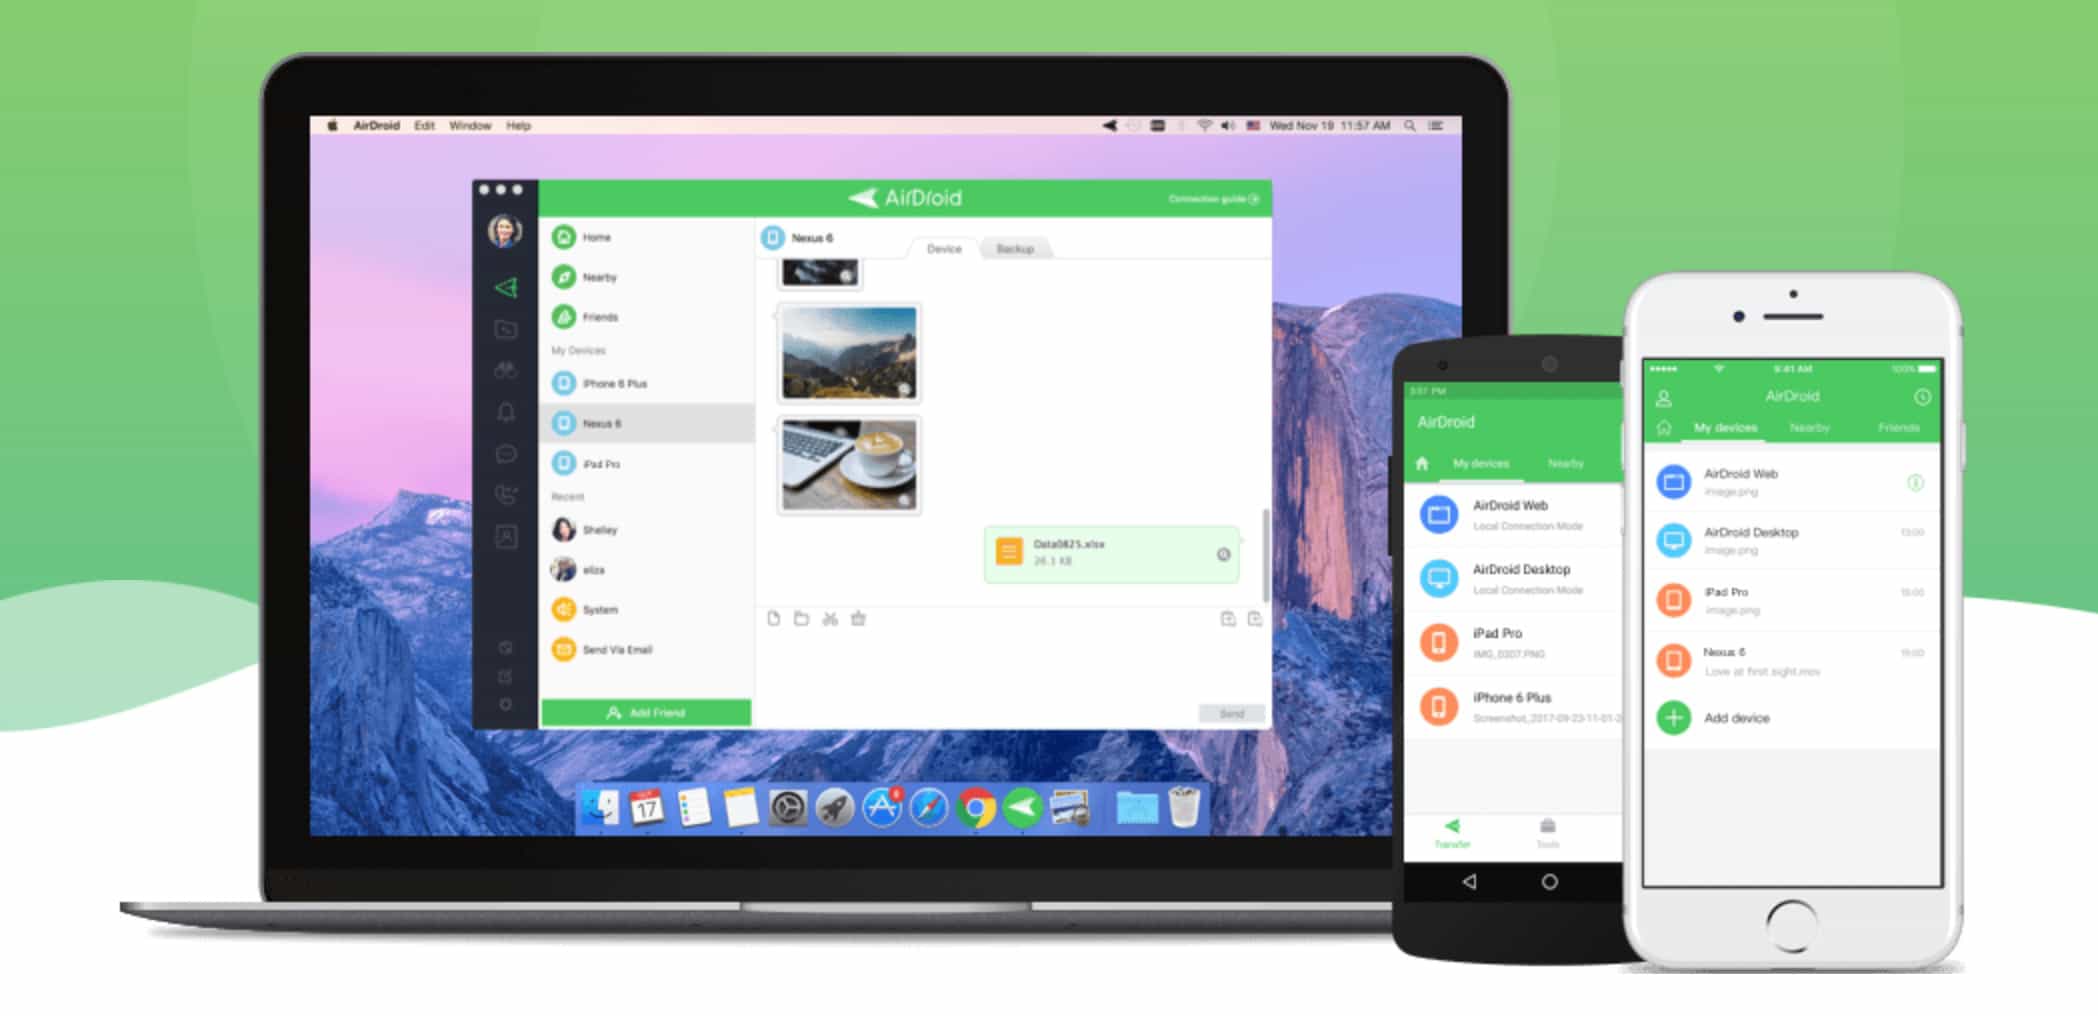 AirDroid file transfer on iOS